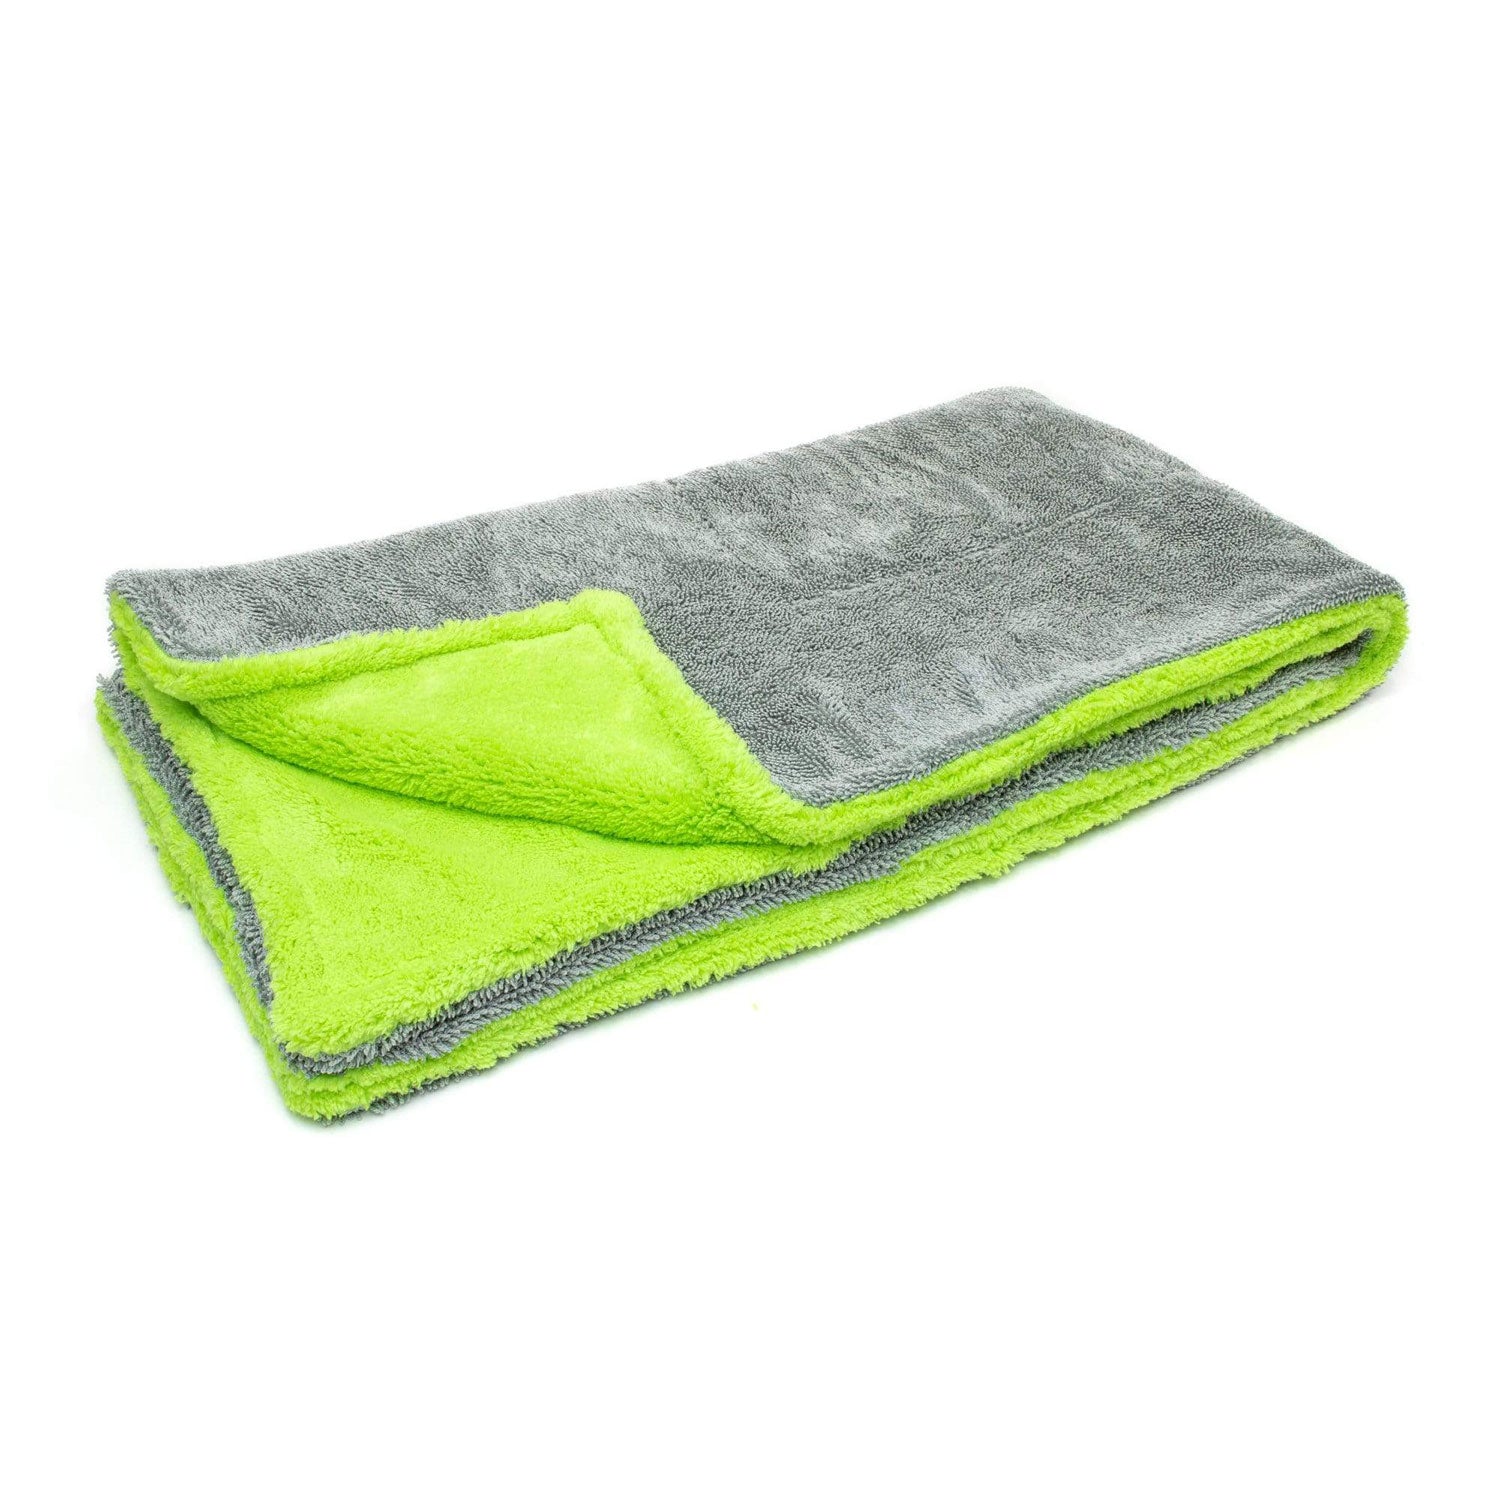 Large Super-Absorbent Double-Twist Microfiber Car Drying Towel 20